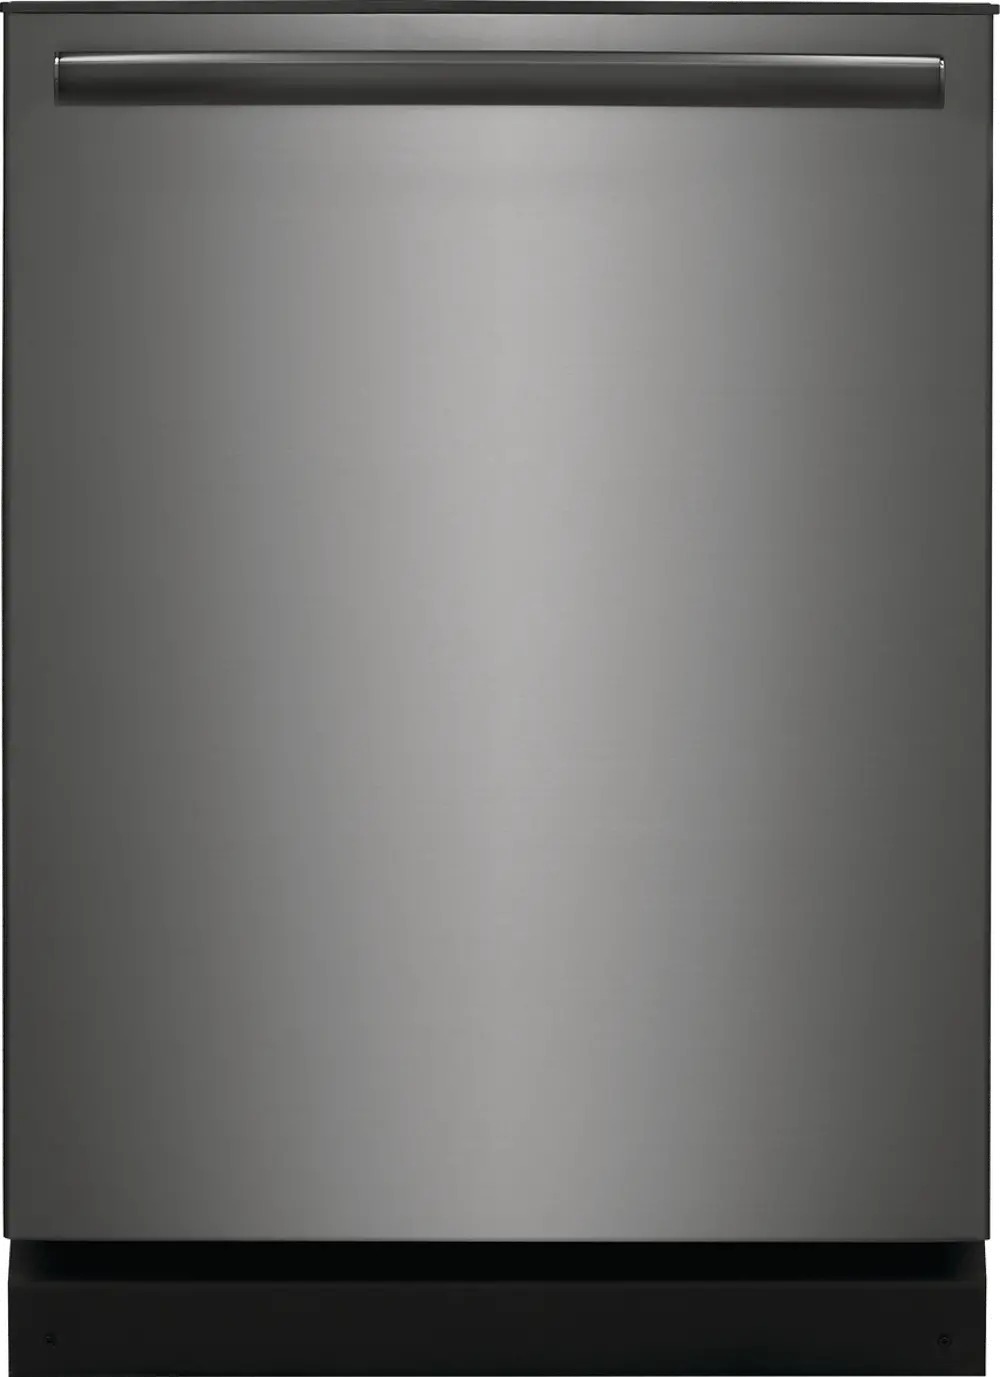 GDPH4515AD Frigidaire Gallery Top Control Dishwasher - Black Stainless Steel-1